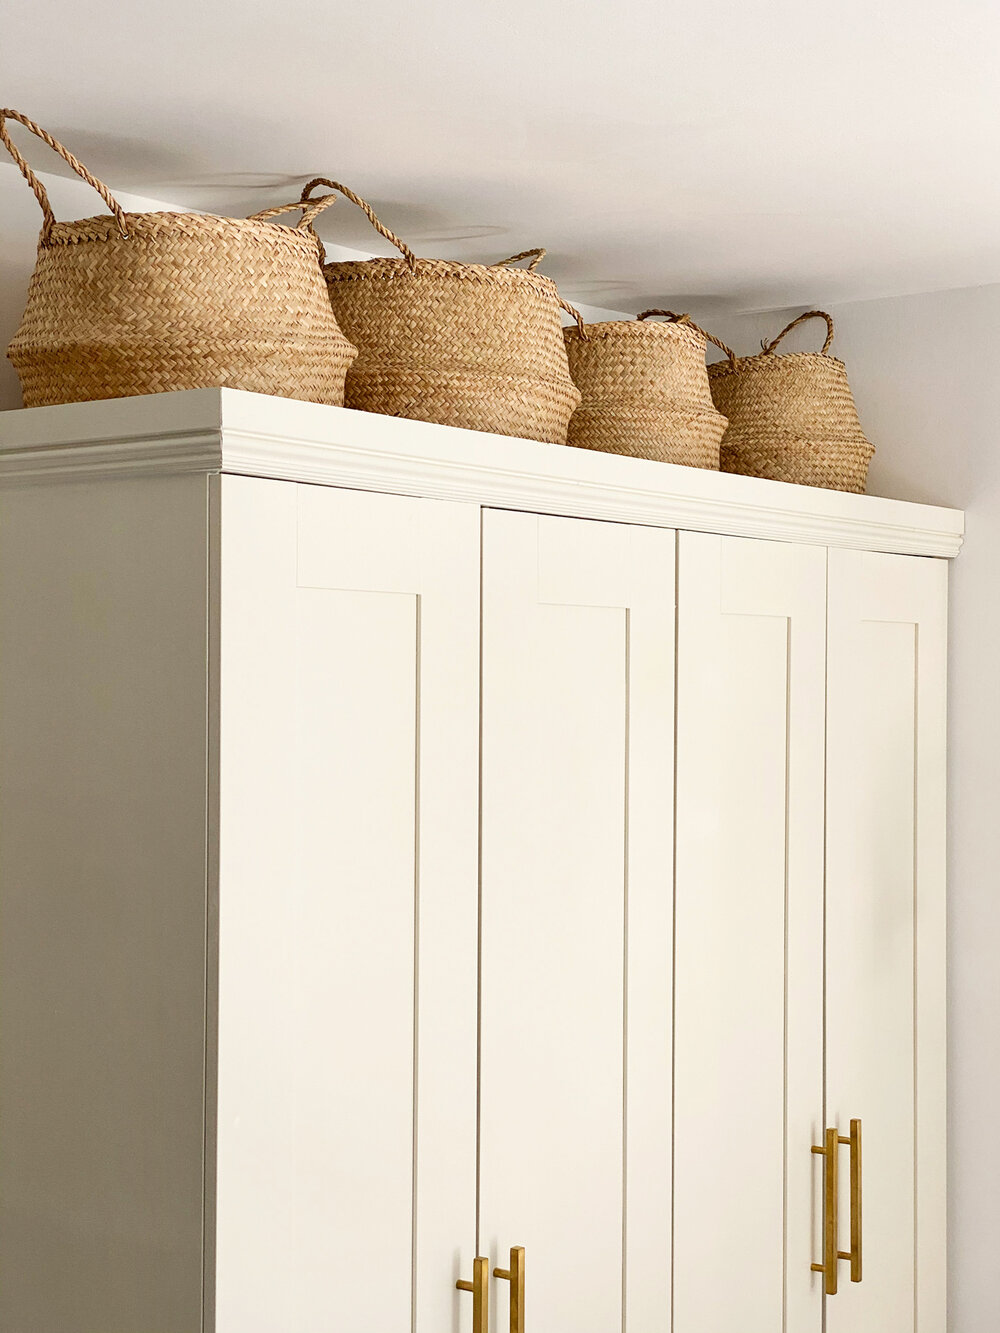  Topping the wardrobes with a row of seagrass baskets helps utilize every square inch of the wall for storage. 